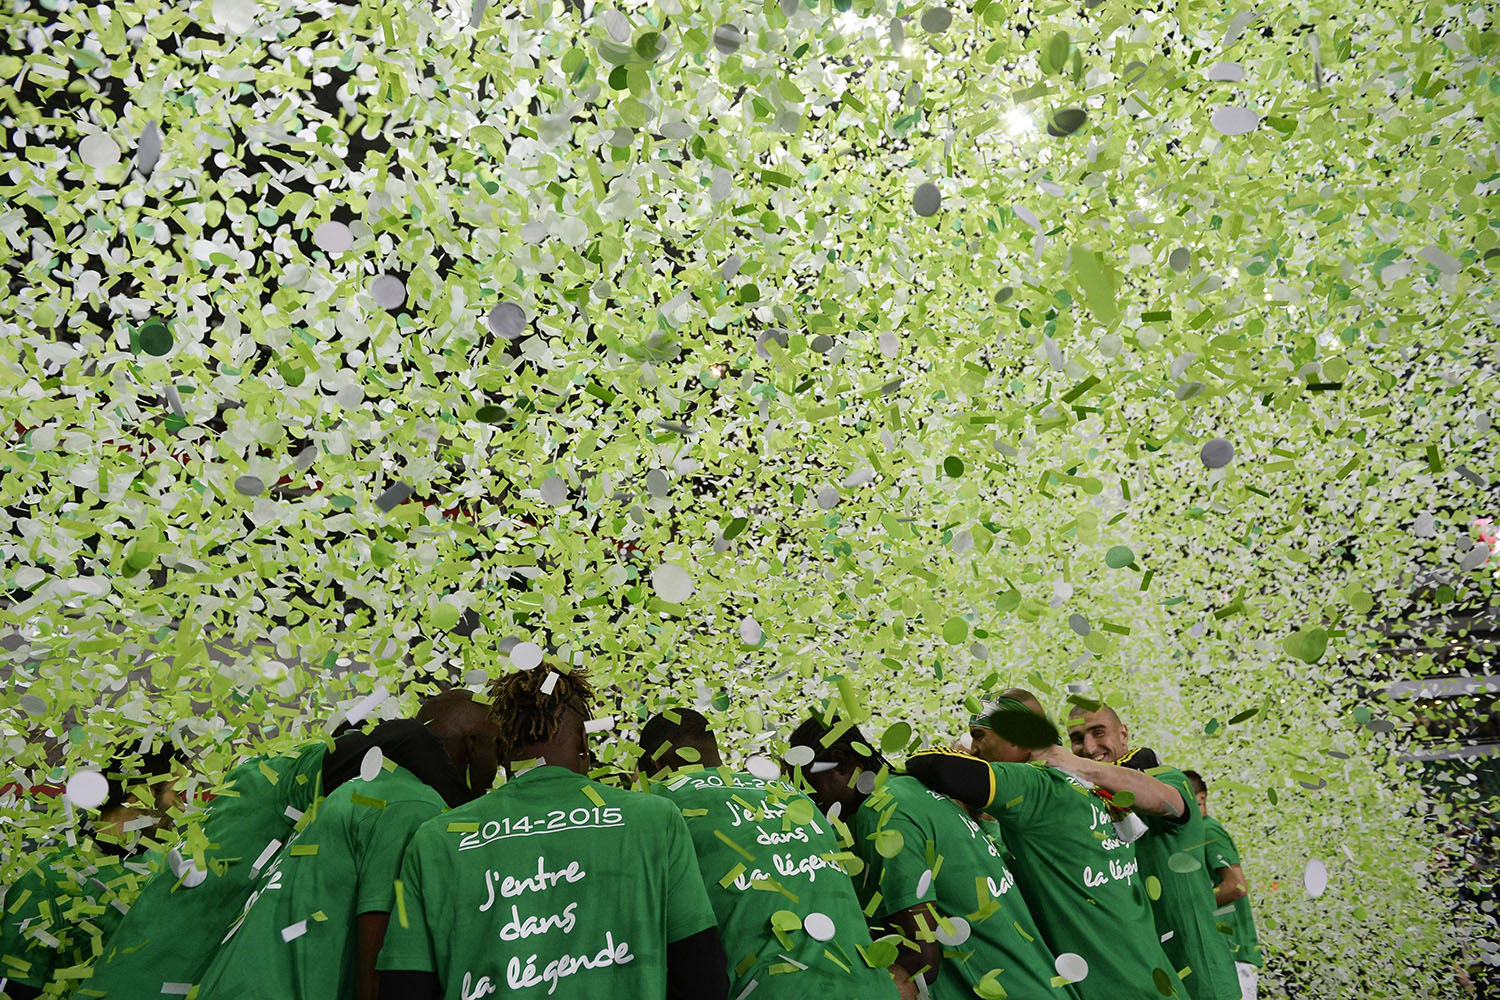 Saint-Etienne's players celebrate victory at the end of the French League football match between Saint-Etienne and Ajaccio, at the Geoffroy Guichard stadium in Saint-Etienne, central France, on May 18, 2014.